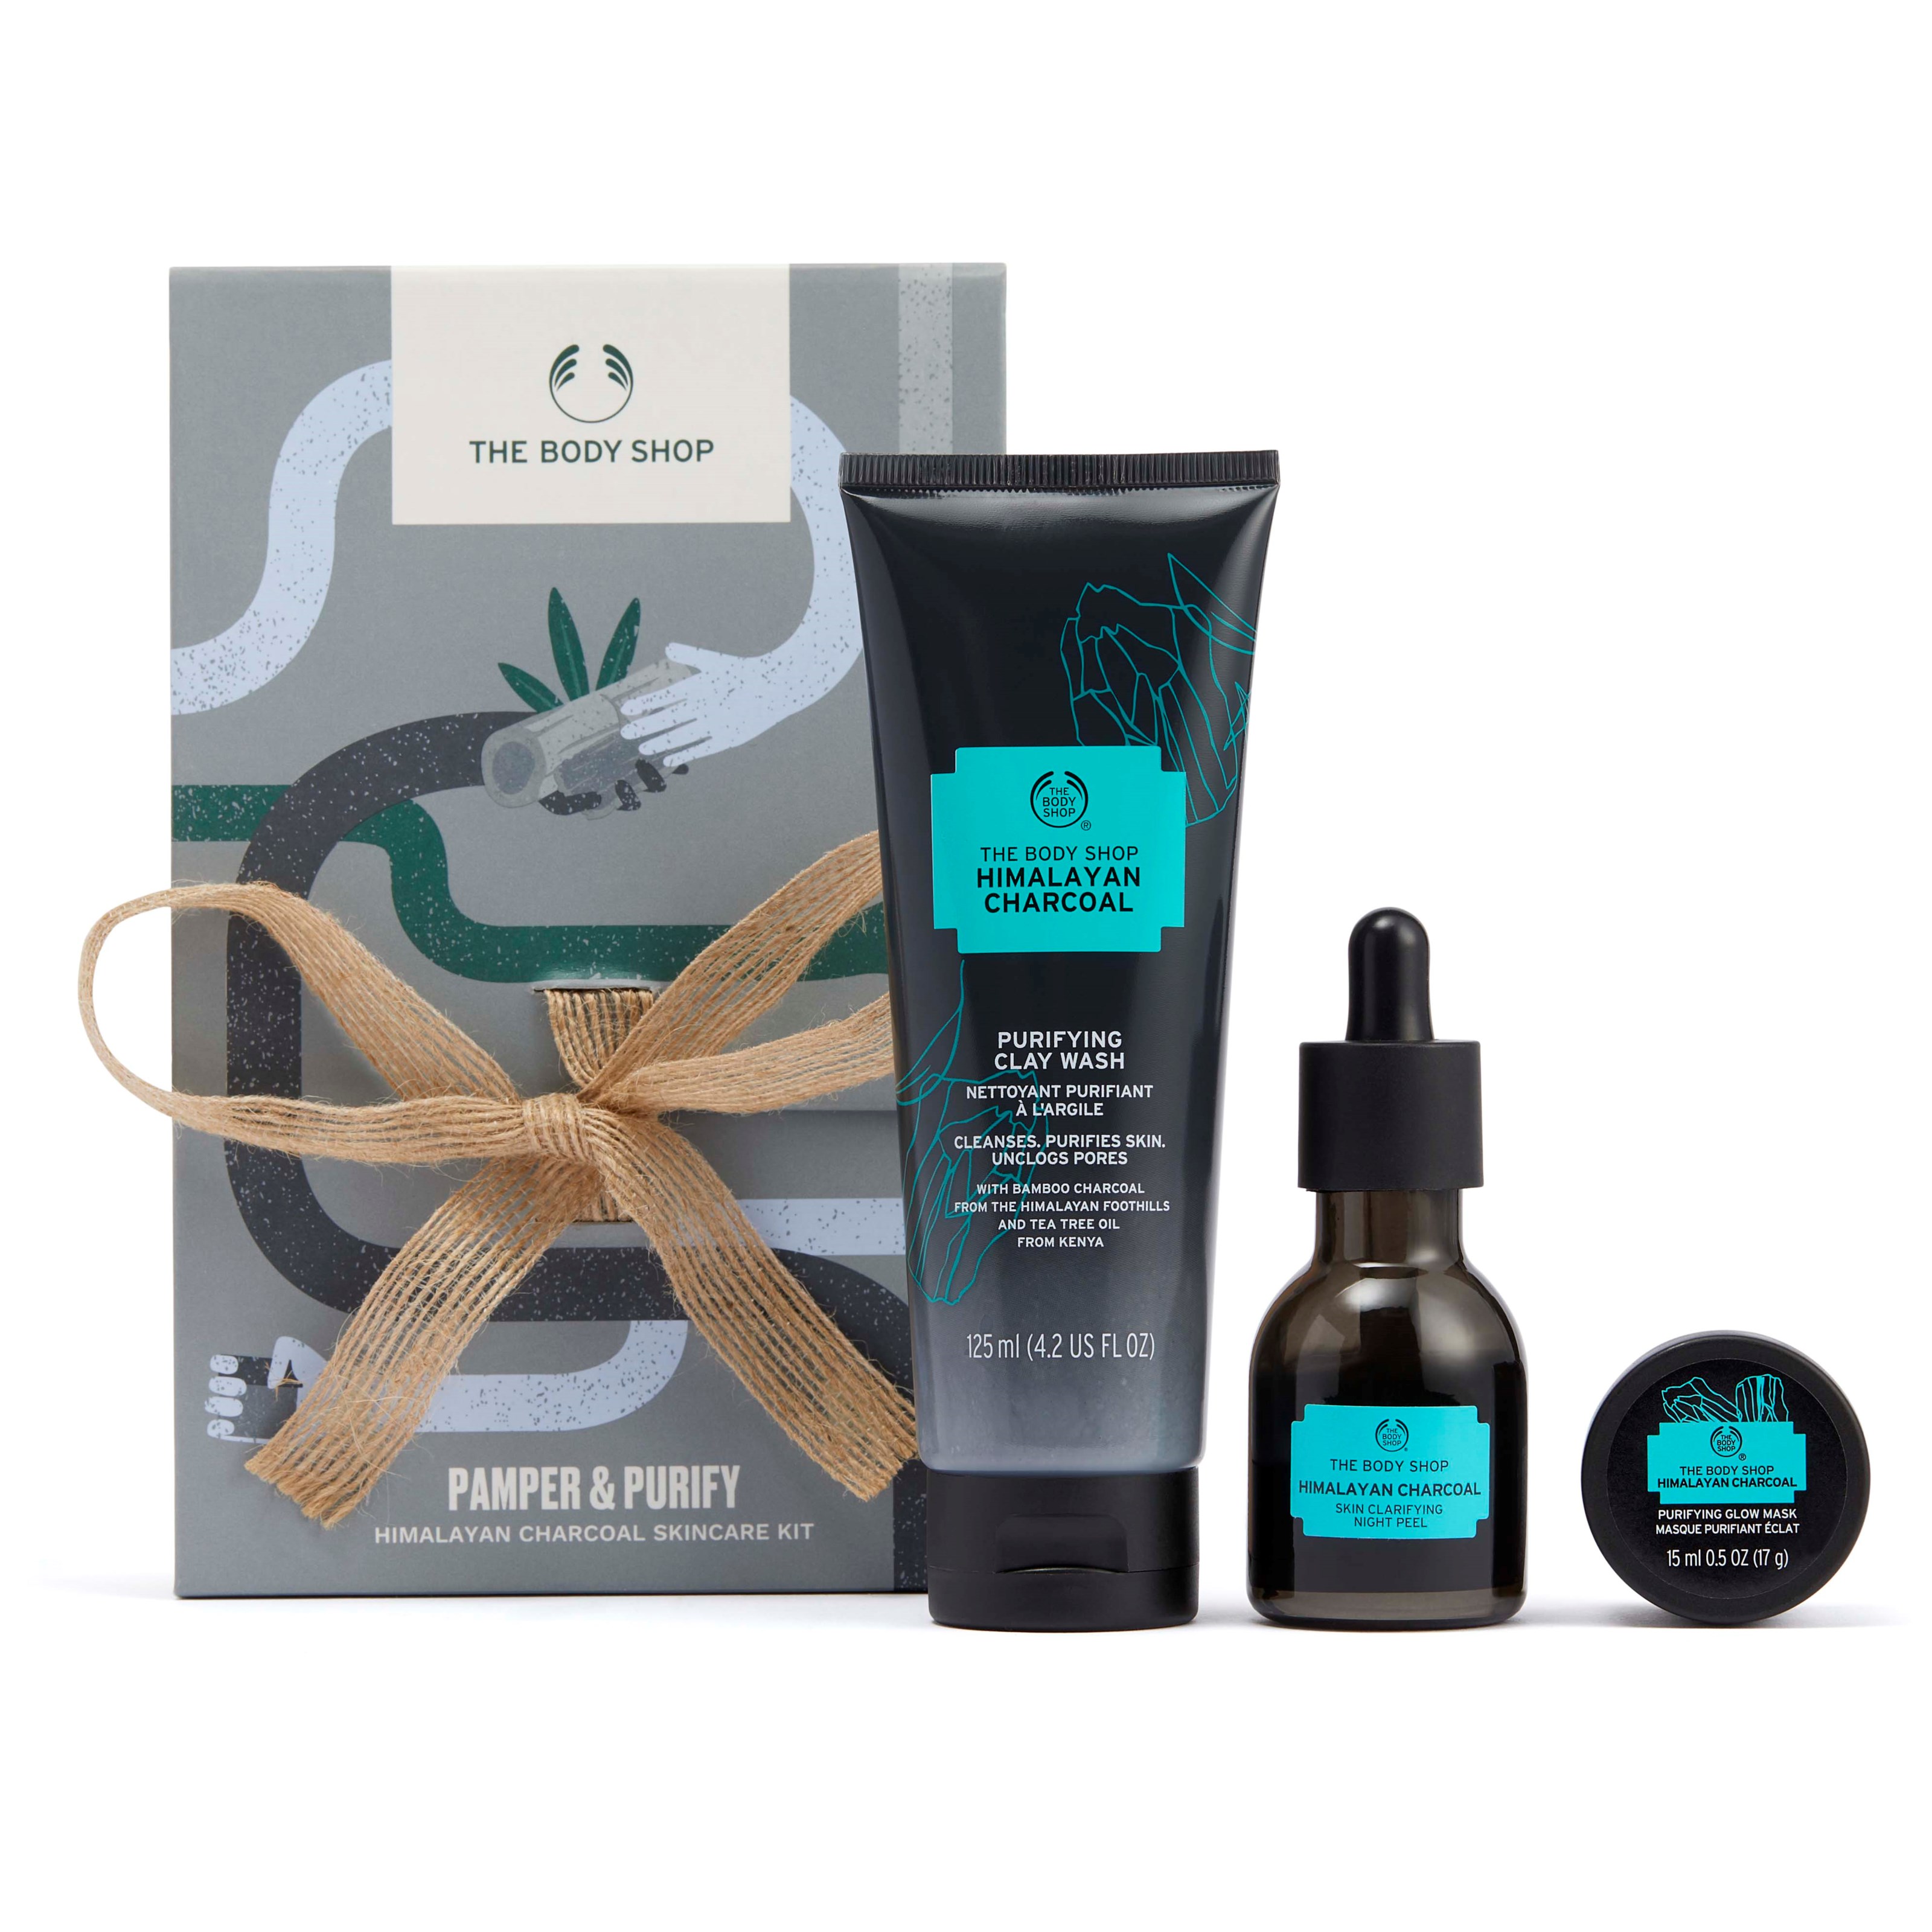 Läs mer om The Body Shop Pamper & Purfify Himalayan Charcoal Skincare Kit